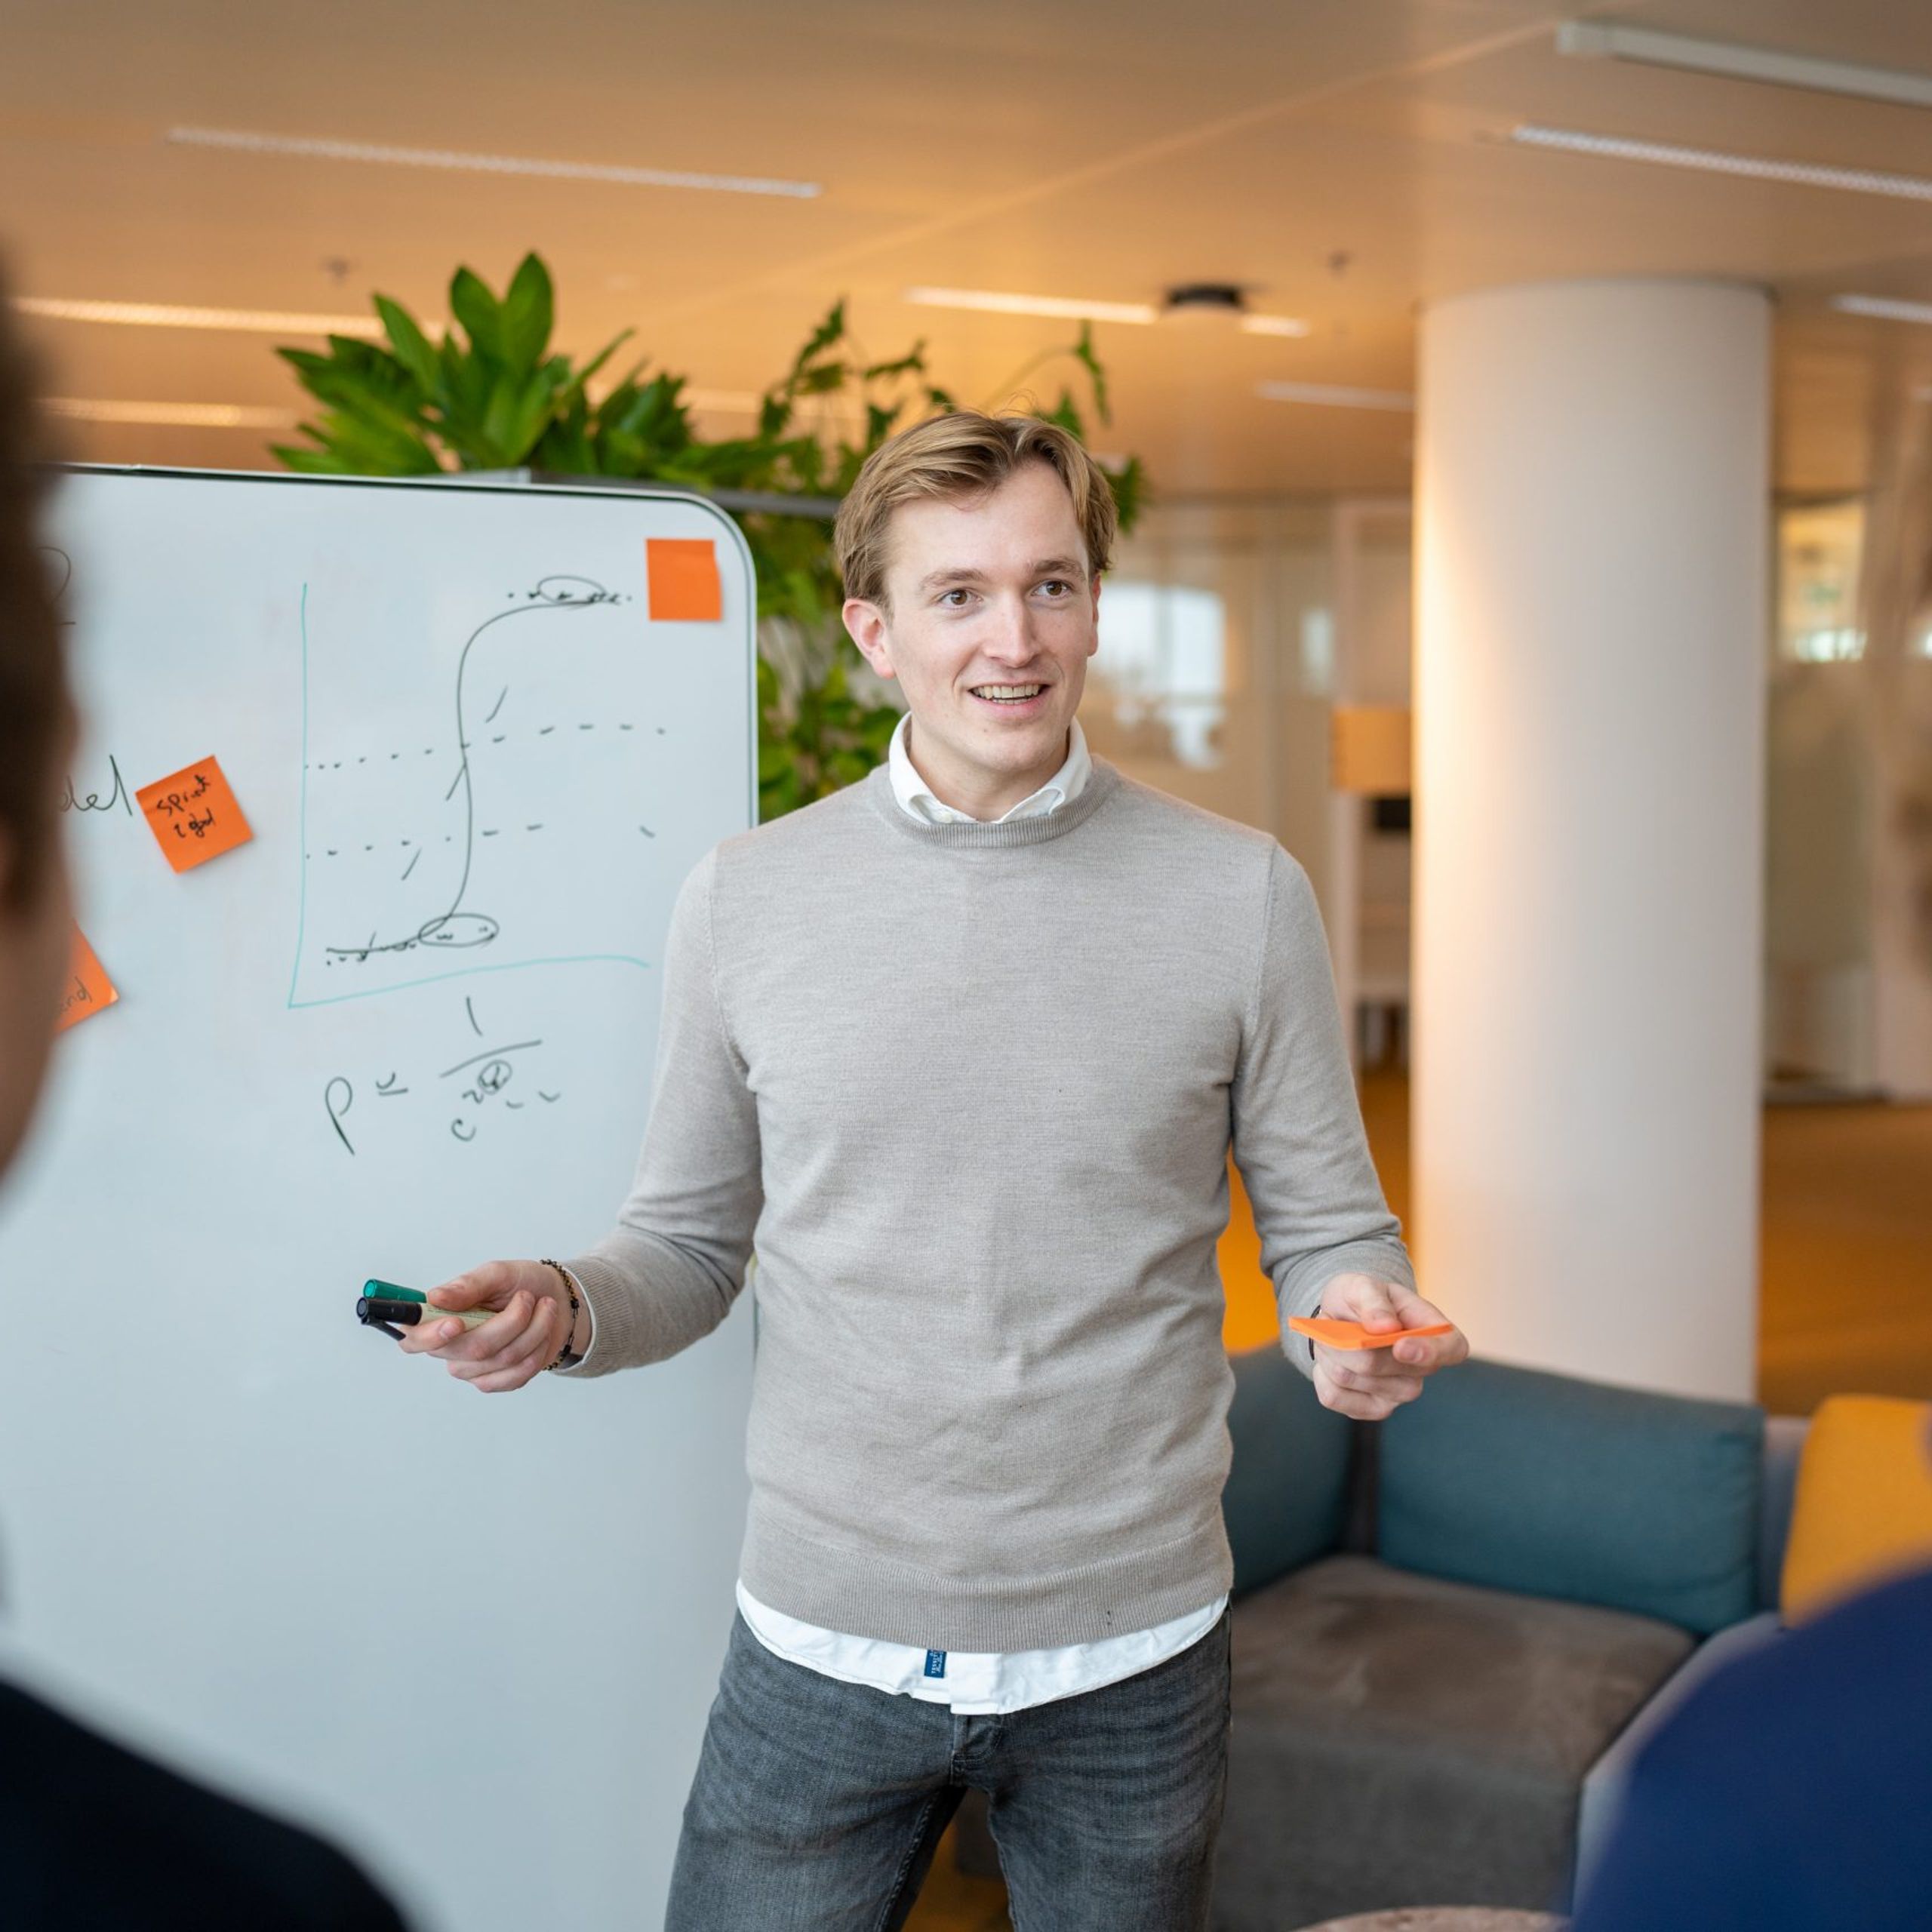 Michiel presents something in front of a white board